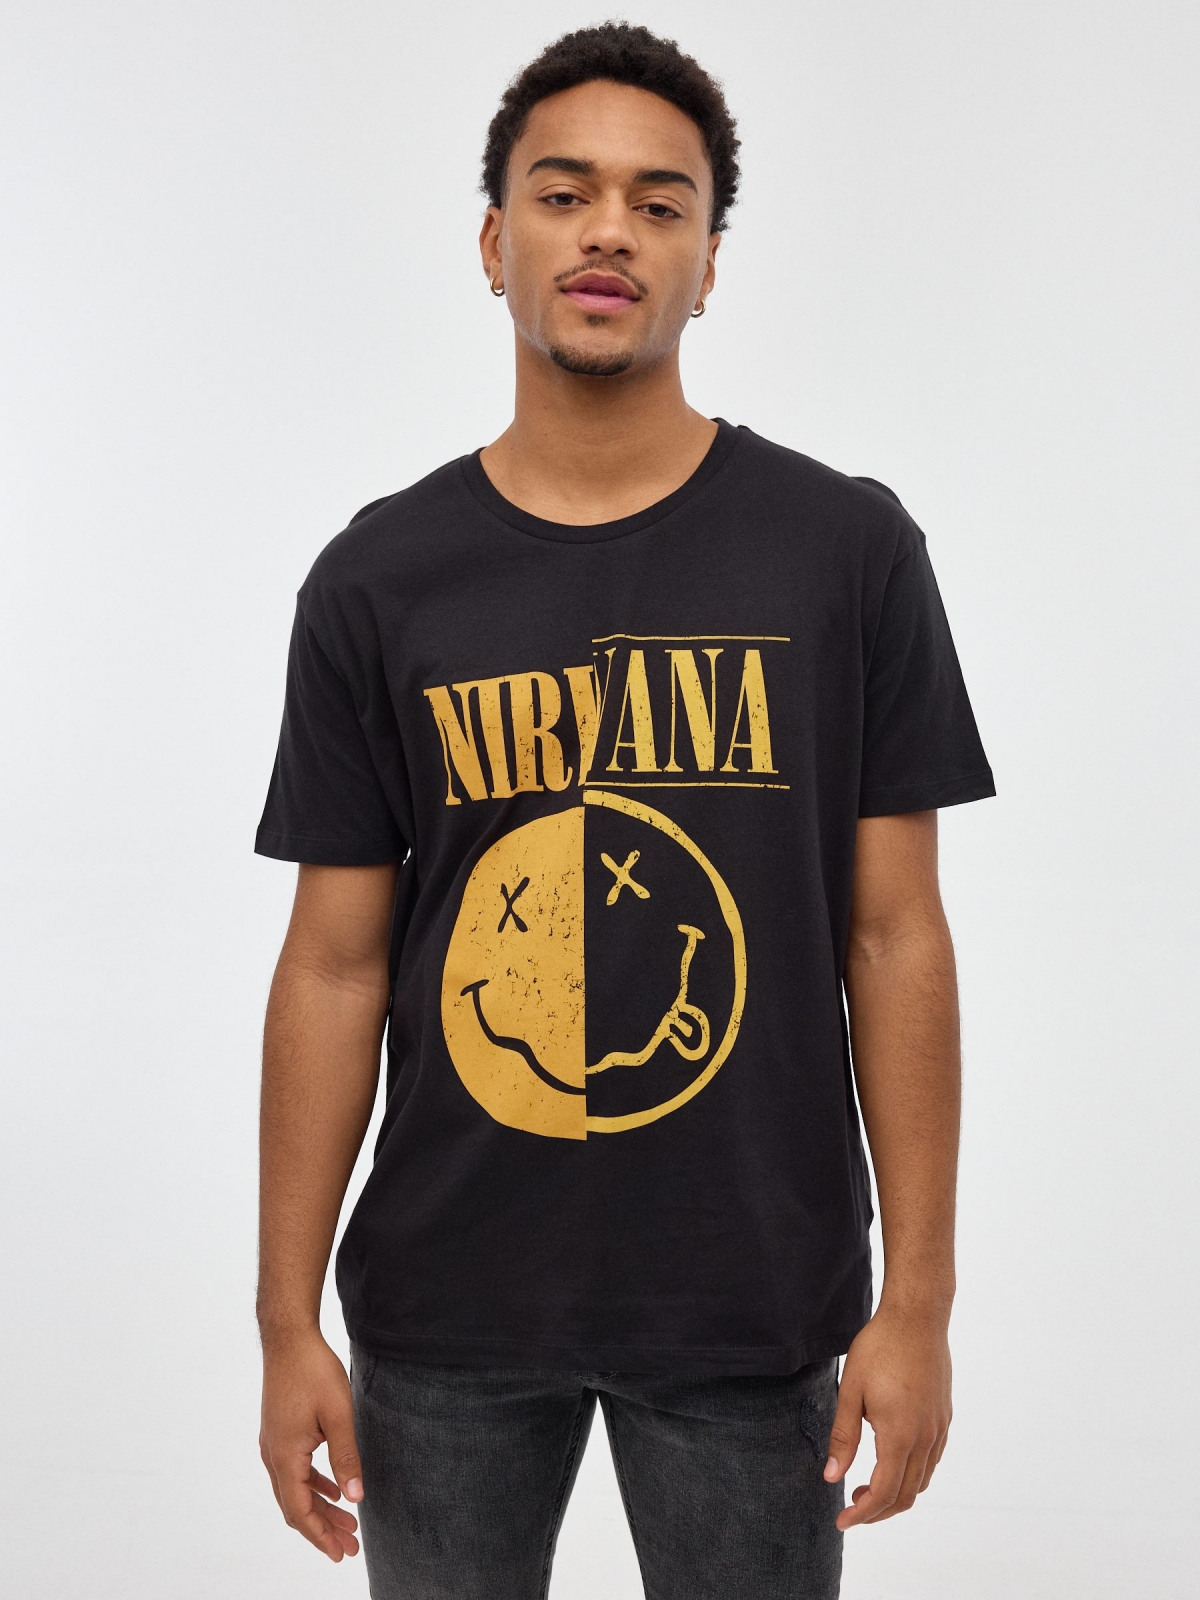 Nirvana printed T-shirt dark grey middle front view